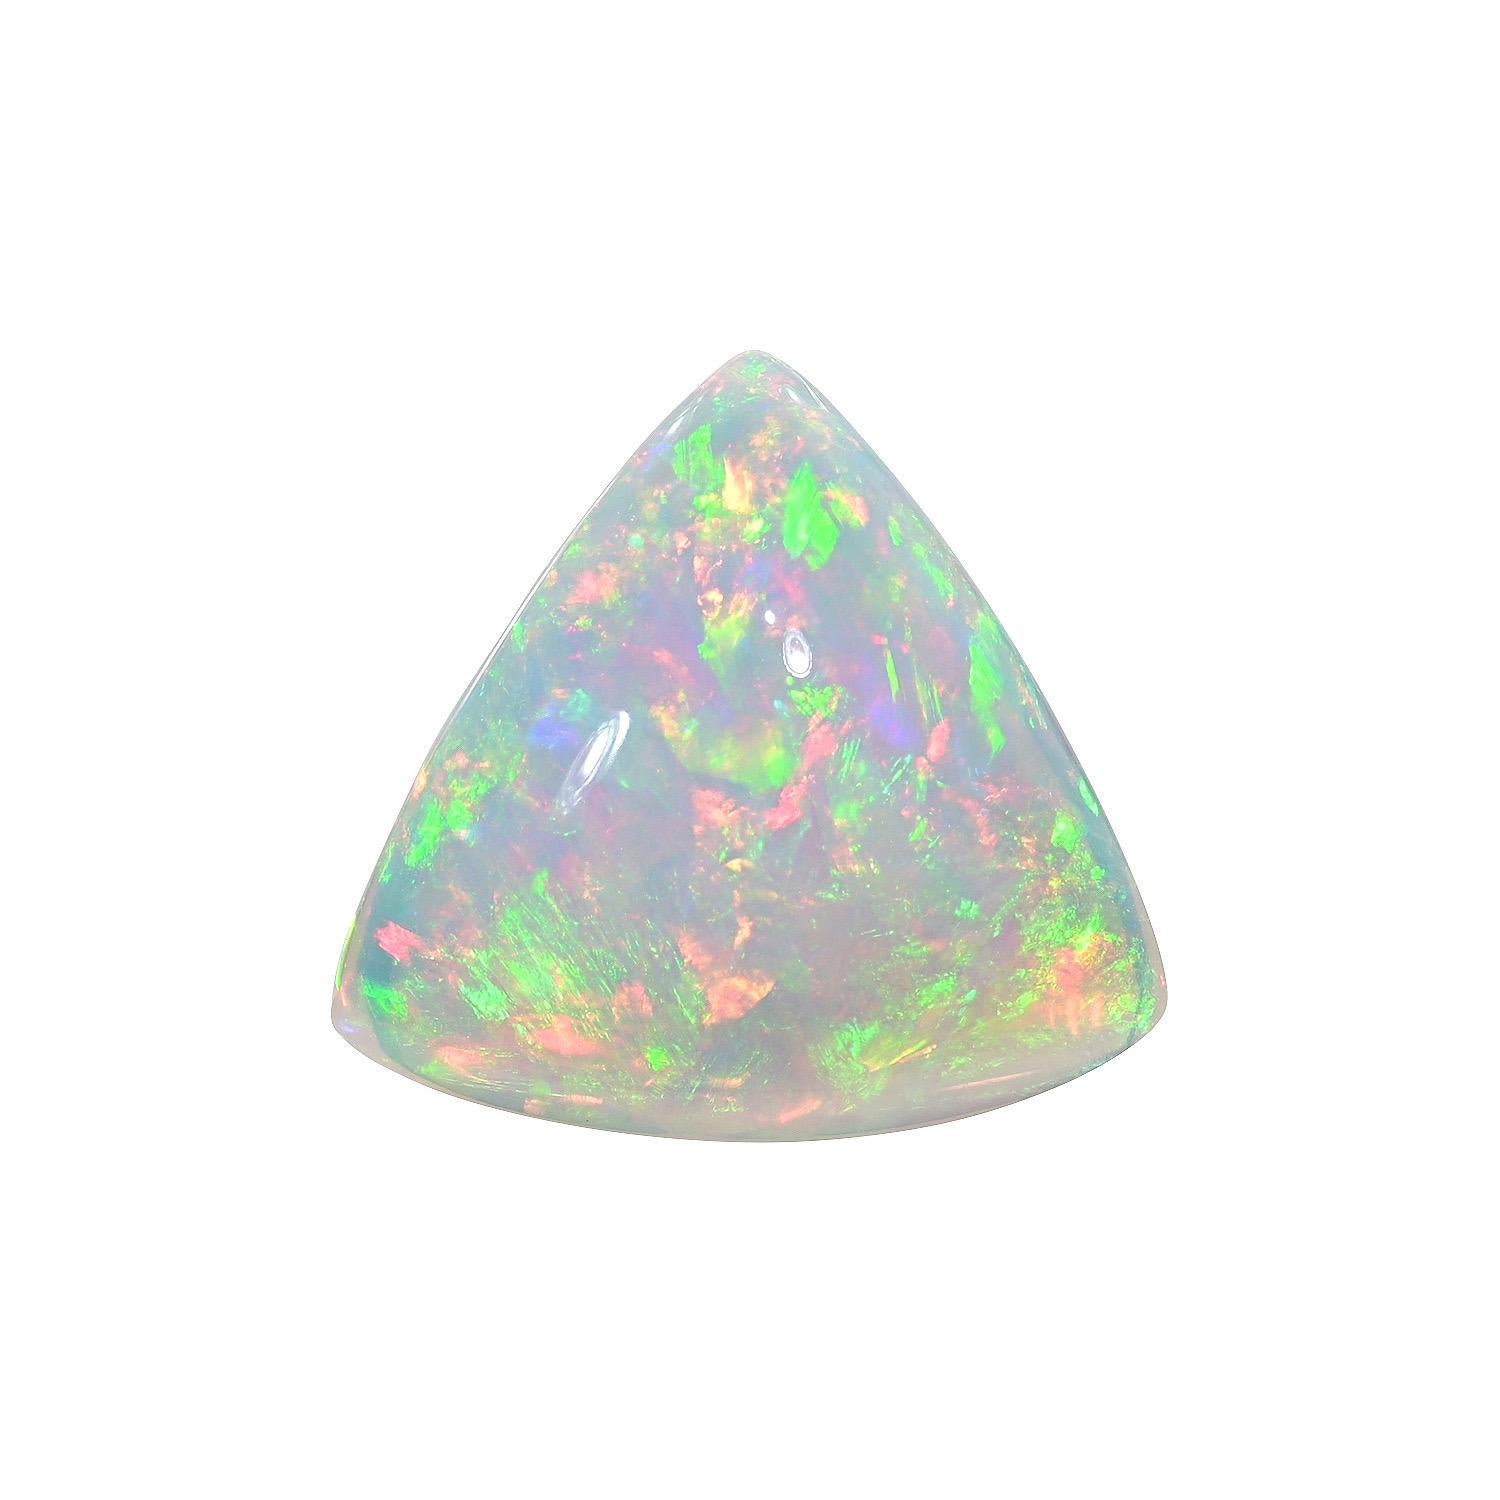 Natural 12.00 carat trillion Ethiopian Opal loose gemstone, offered unmounted to a unique gem connoisseur.
Returns are accepted and paid by us within 7 days of delivery.
We offer supreme custom jewelry work upon request. Please contact us for more